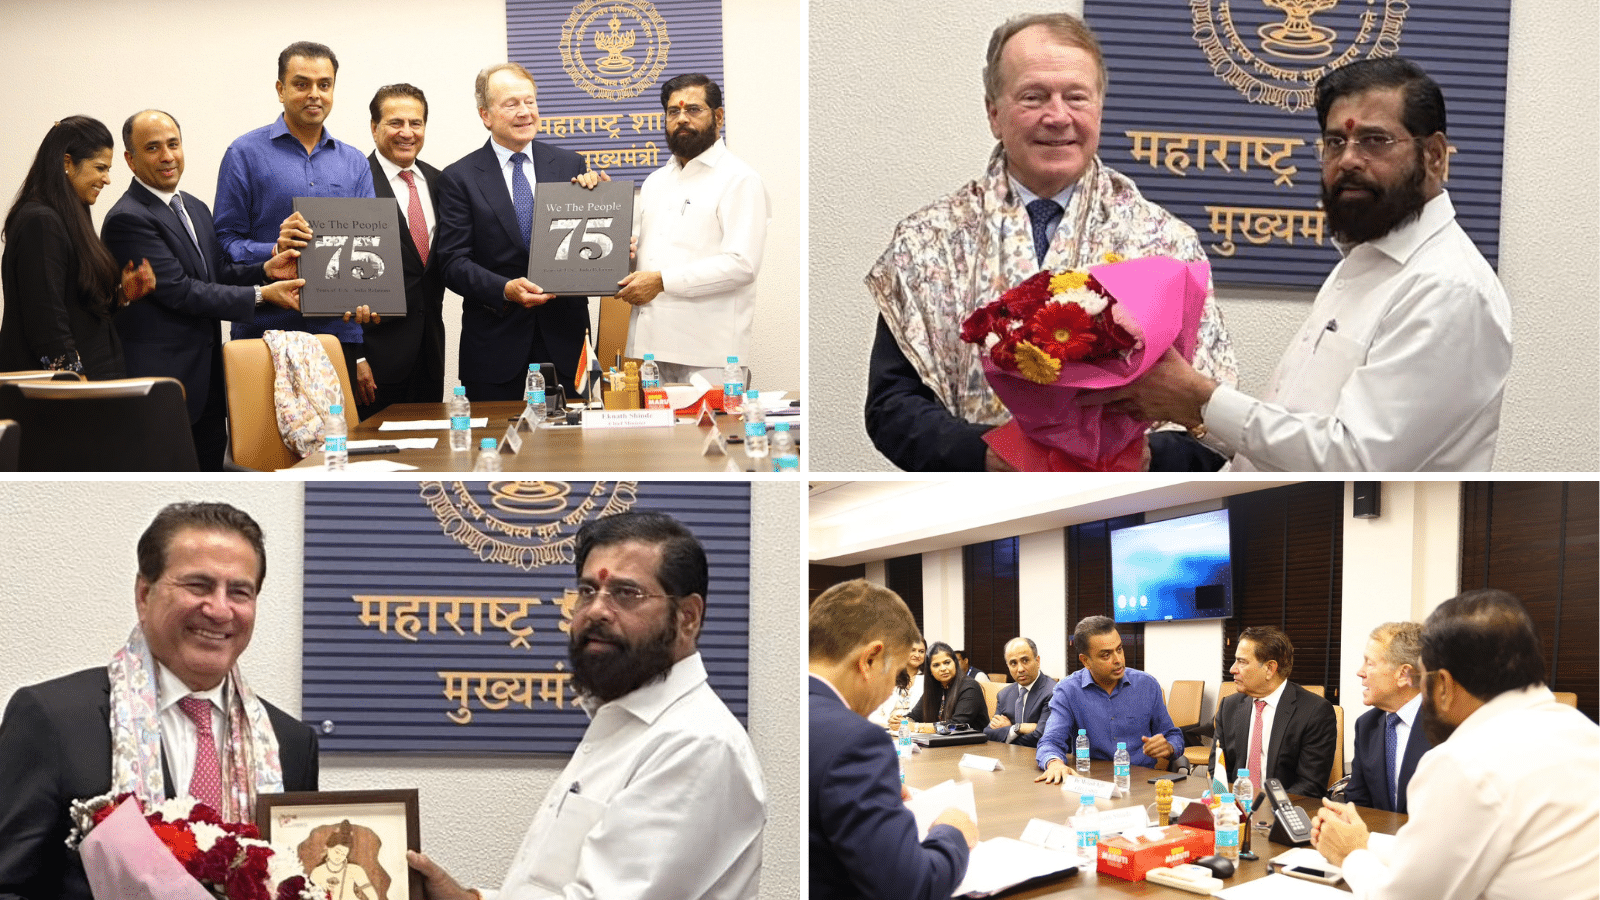 USISPF Chairman John T. Chambers, along with Dr. Mukesh Aghi, President & CEO of USISPF, met with Shri Eknath Shinde, Hon'ble Chief Minister of Maharashtra, in Mumbai